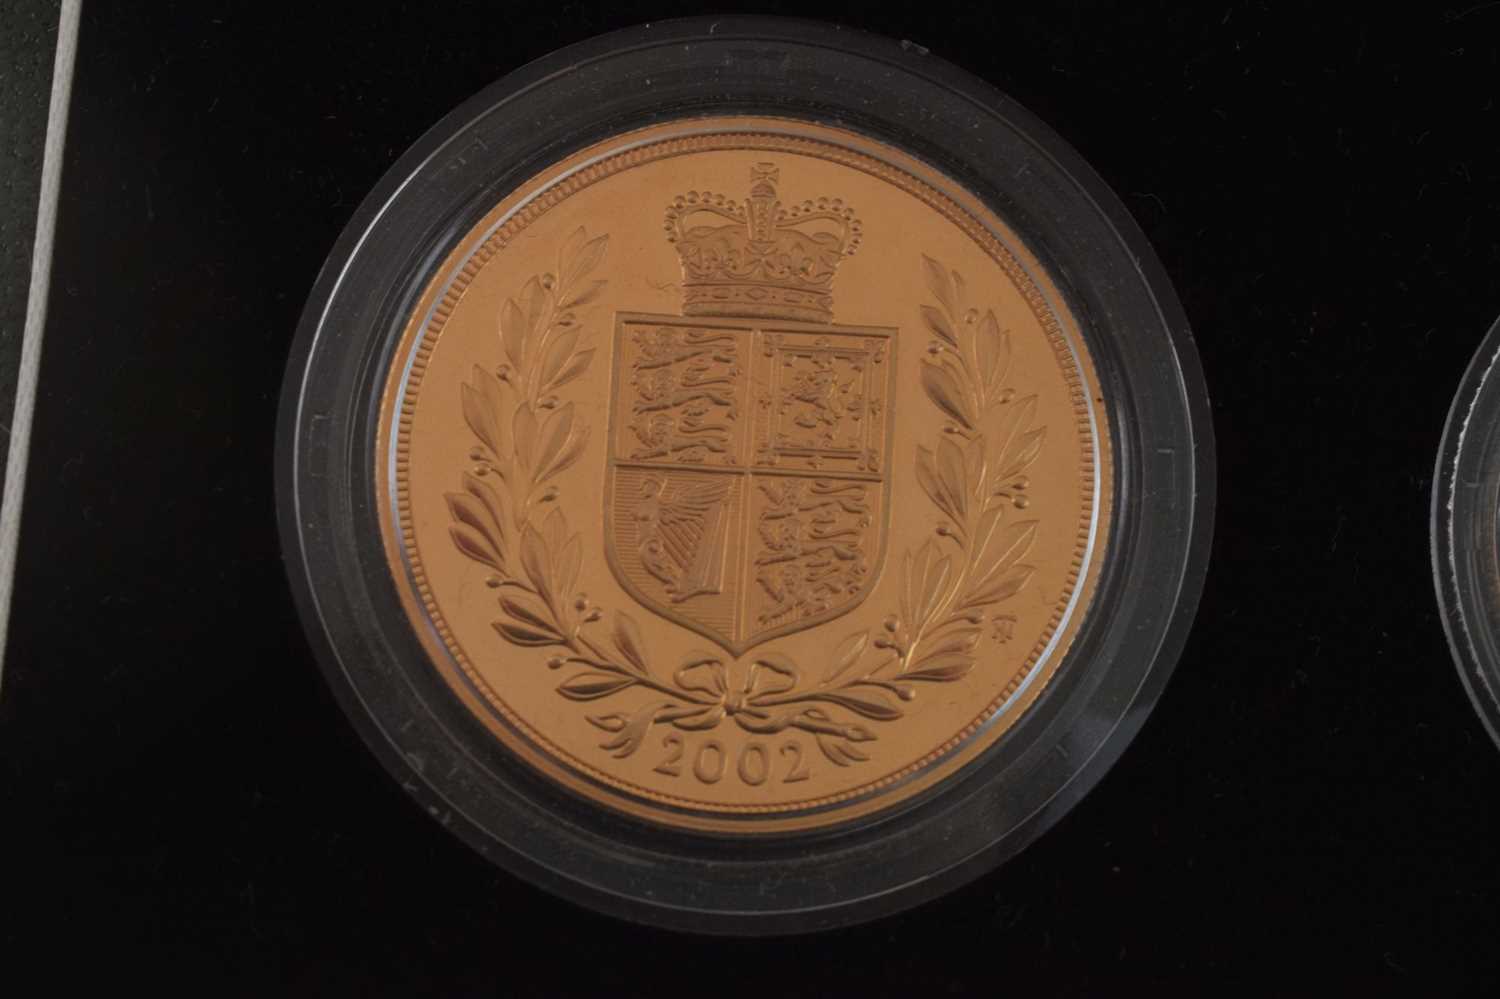 Royal Mint Gold Proof four-coin Sovereign Set, 2002 - Image 2 of 12